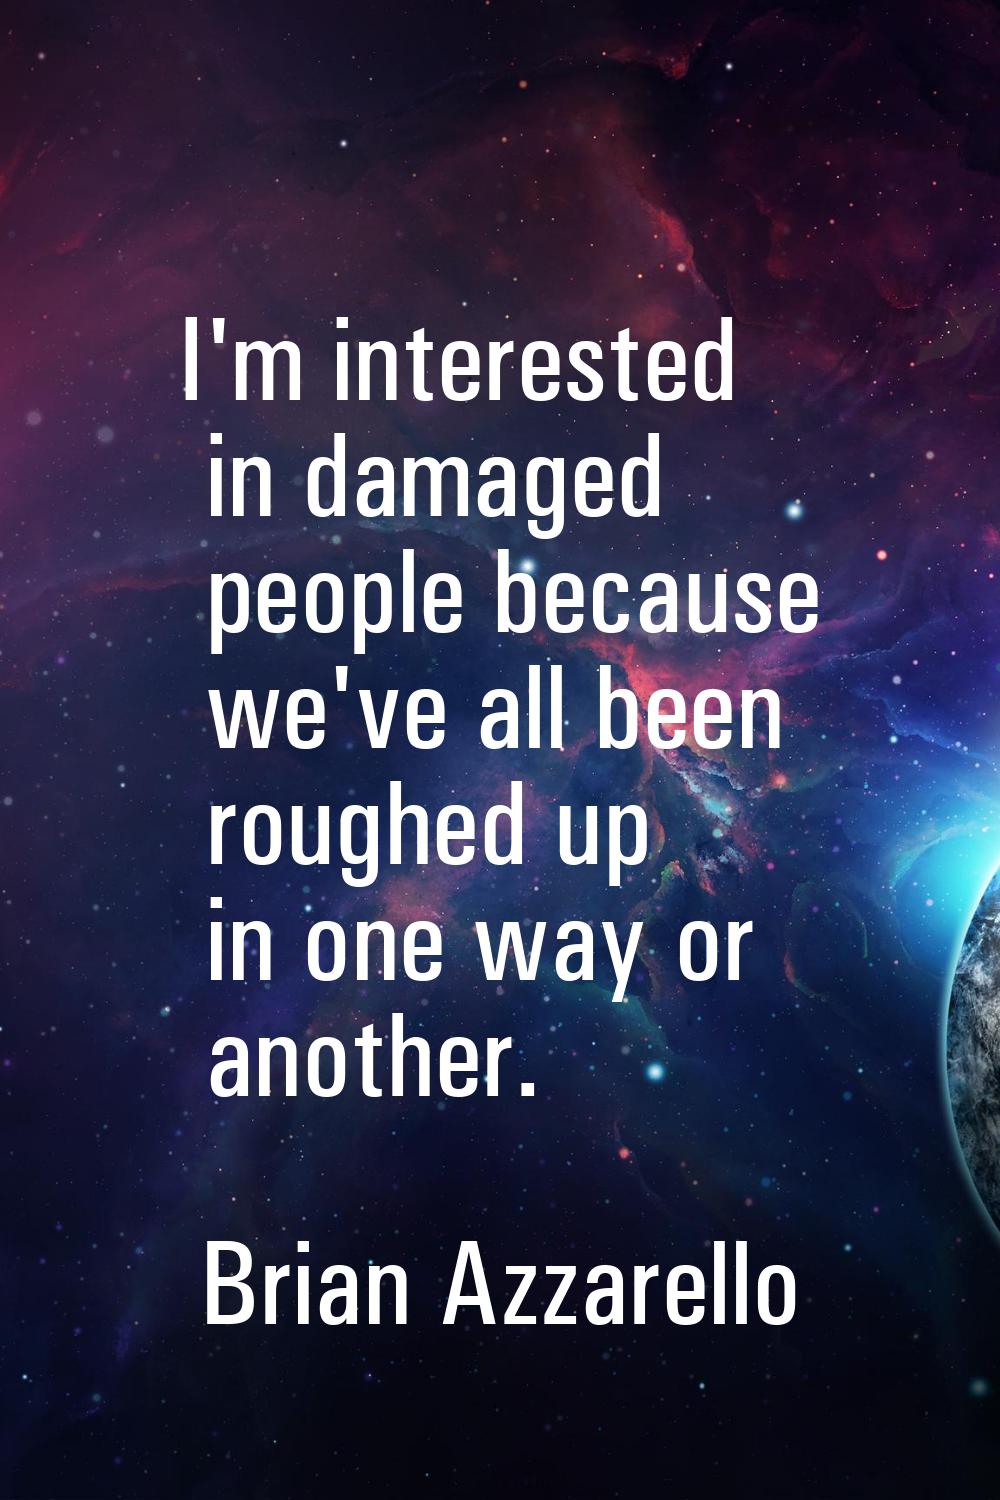 I'm interested in damaged people because we've all been roughed up in one way or another.